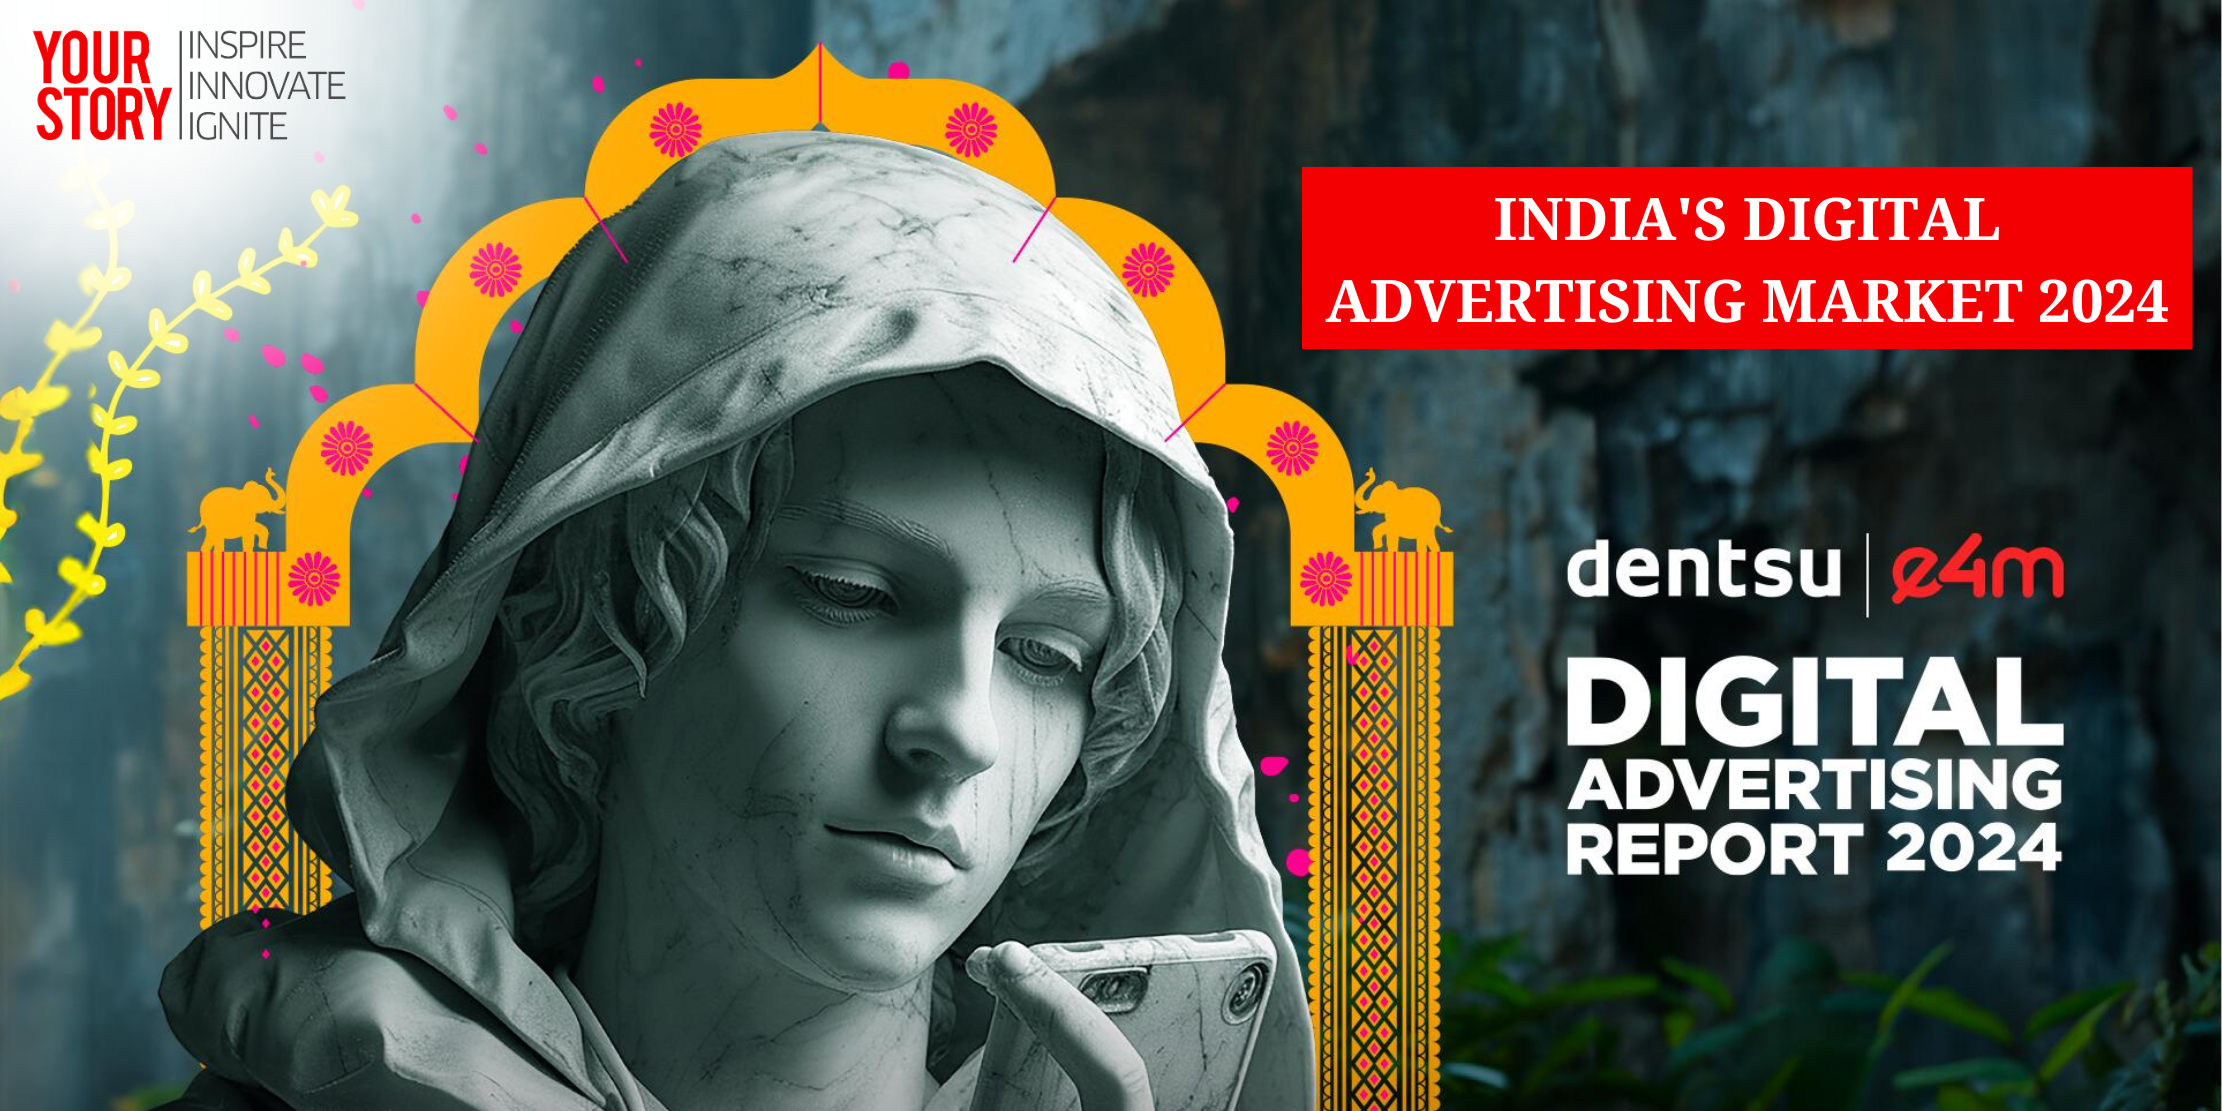 India's Digital Advertising Market 2024: Key Trends and Forecasts from Dentsu & E4M Report